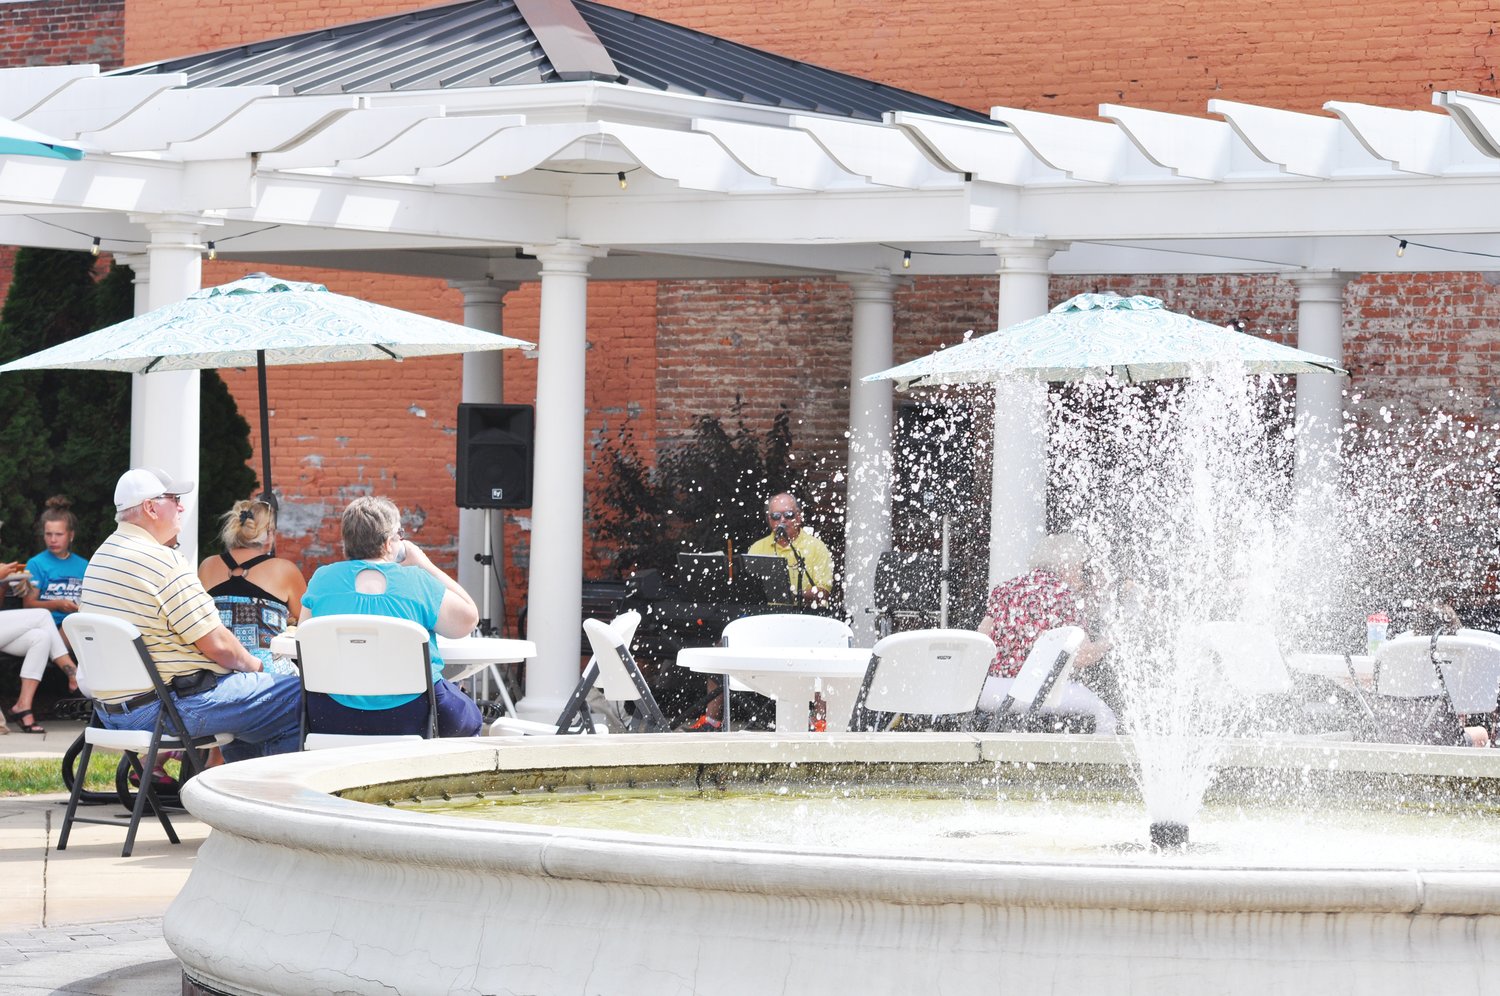 Marie Canine Plaza is host to Crawfordsville Main Street's Lunch on the Plaza series.